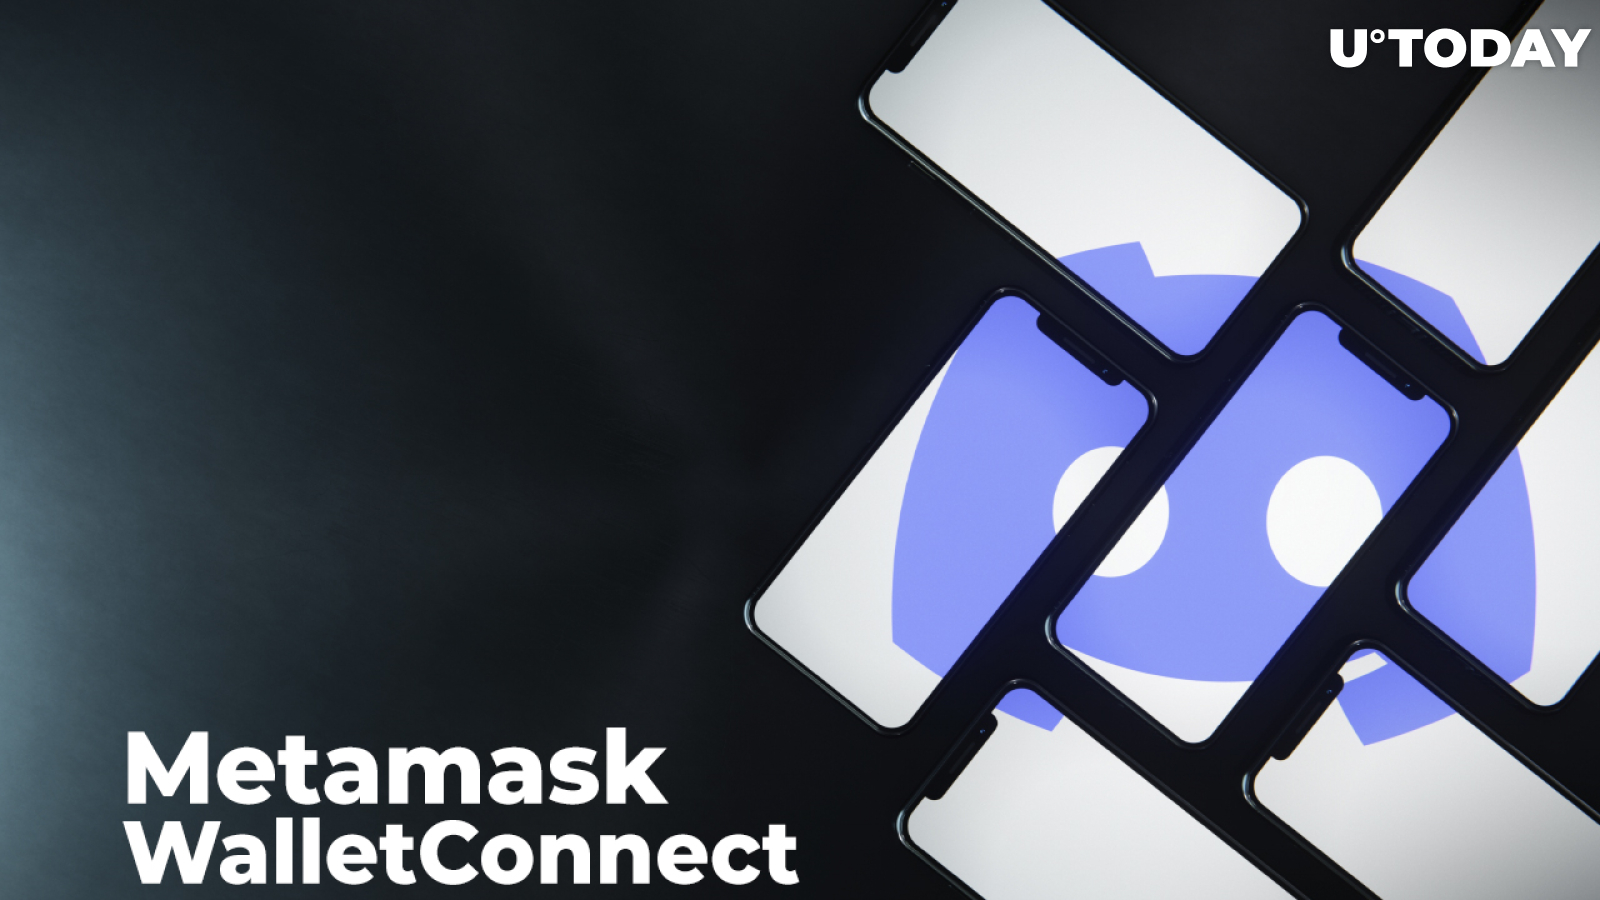 Discord to Integrate Ethereum in Its Network Through Metamask and WalletConnect